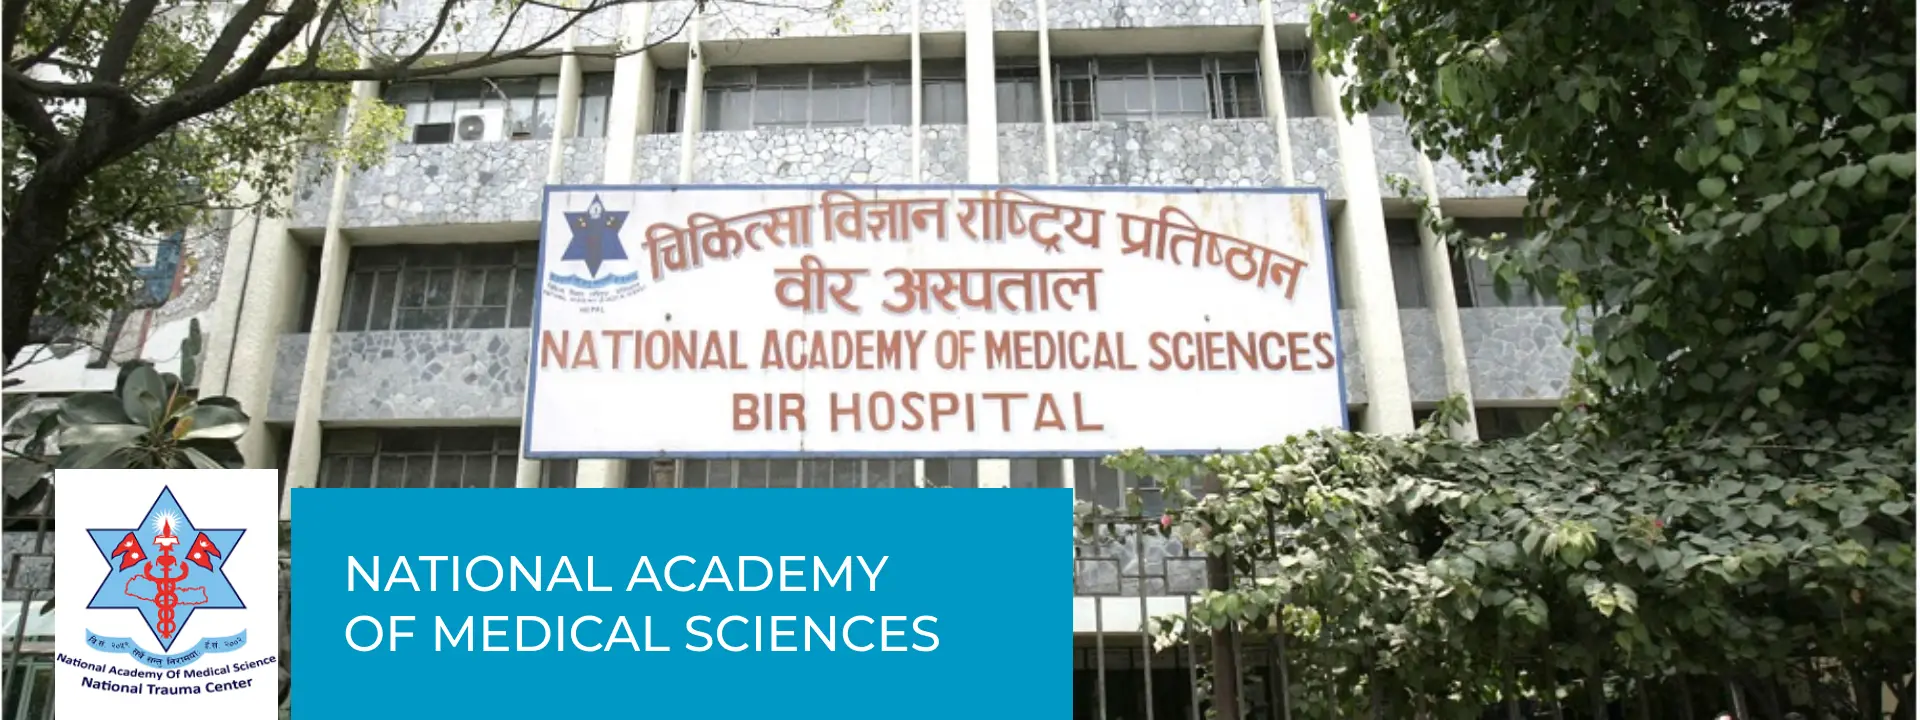 NATIONAL ACADEMY OF MEDICAL SCIENCES 2